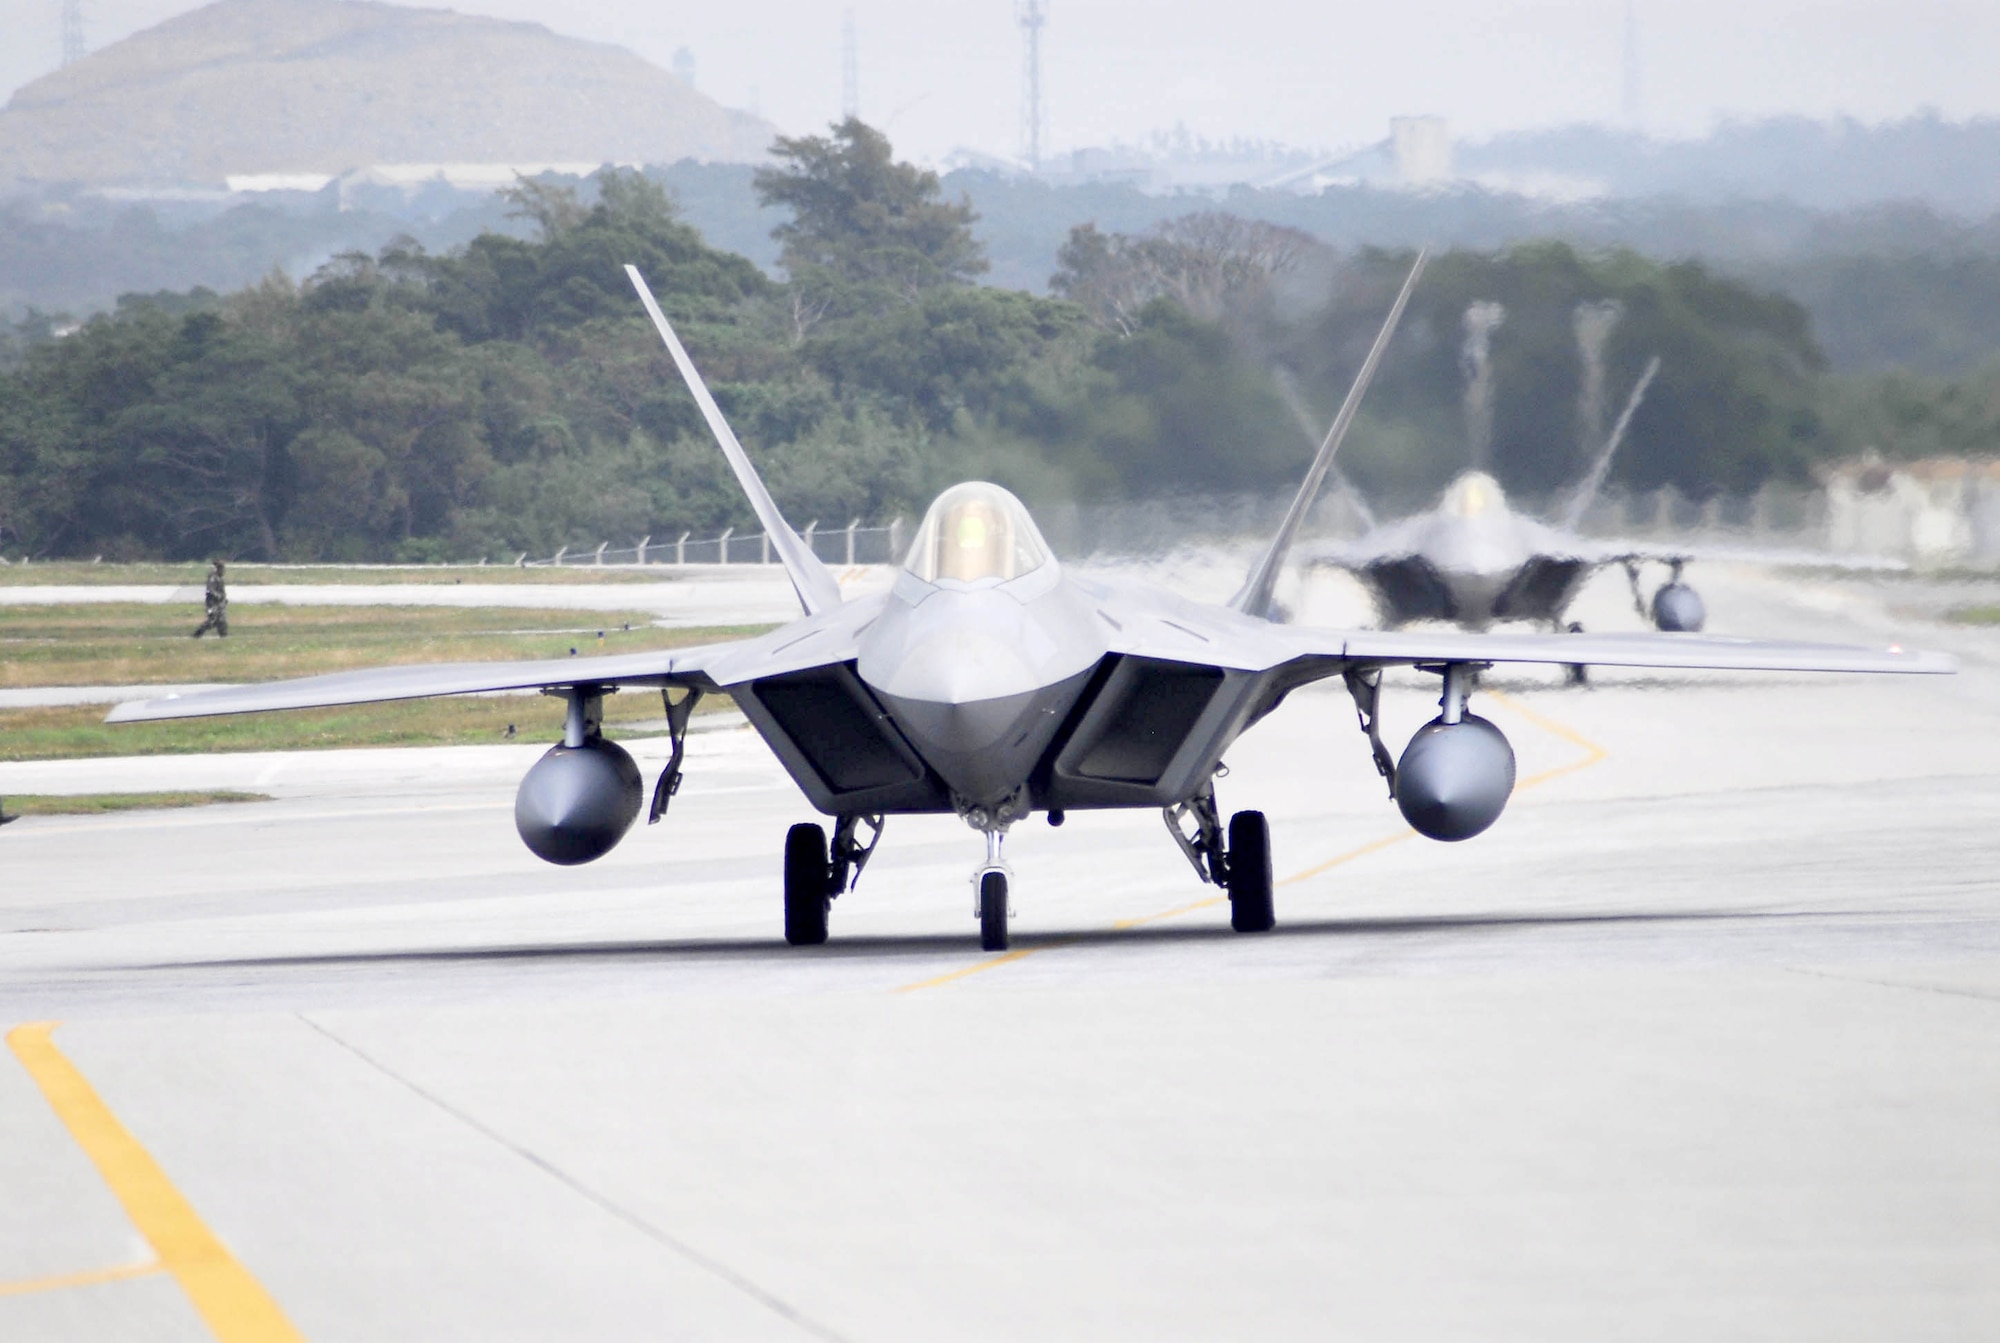 Two F-22 Raptors taxi after landing at Kadena Air Base, Japan, Feb. 18, marking the aircraft's first overseas deployment. The jets are two of 12 along with more than 250 Airmen deployed from Langley Air Force Base, Va., to Kadena as part of an air expeditionary force rotation. (U.S. Air Force photo/Airman Sheila deVera)